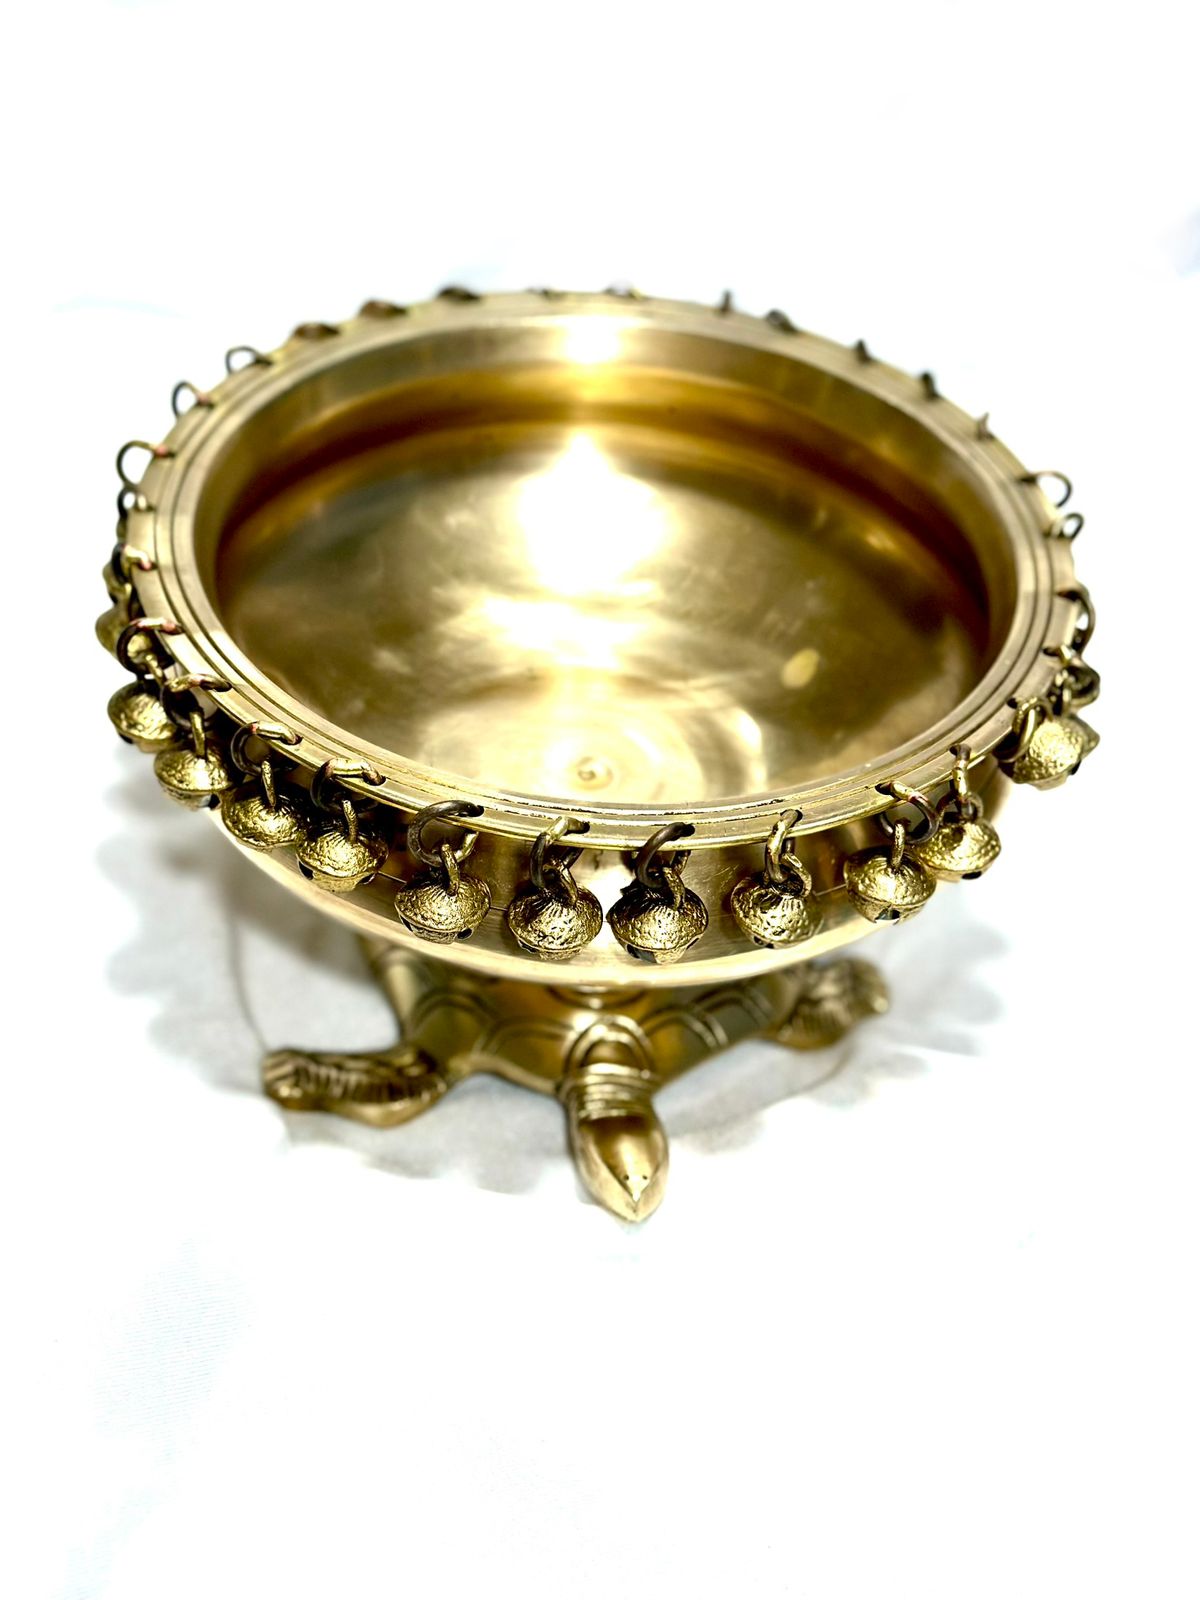 Brass Urli Stand Stand With Bells Ghungroo Traditional Pots From Tamrapatra